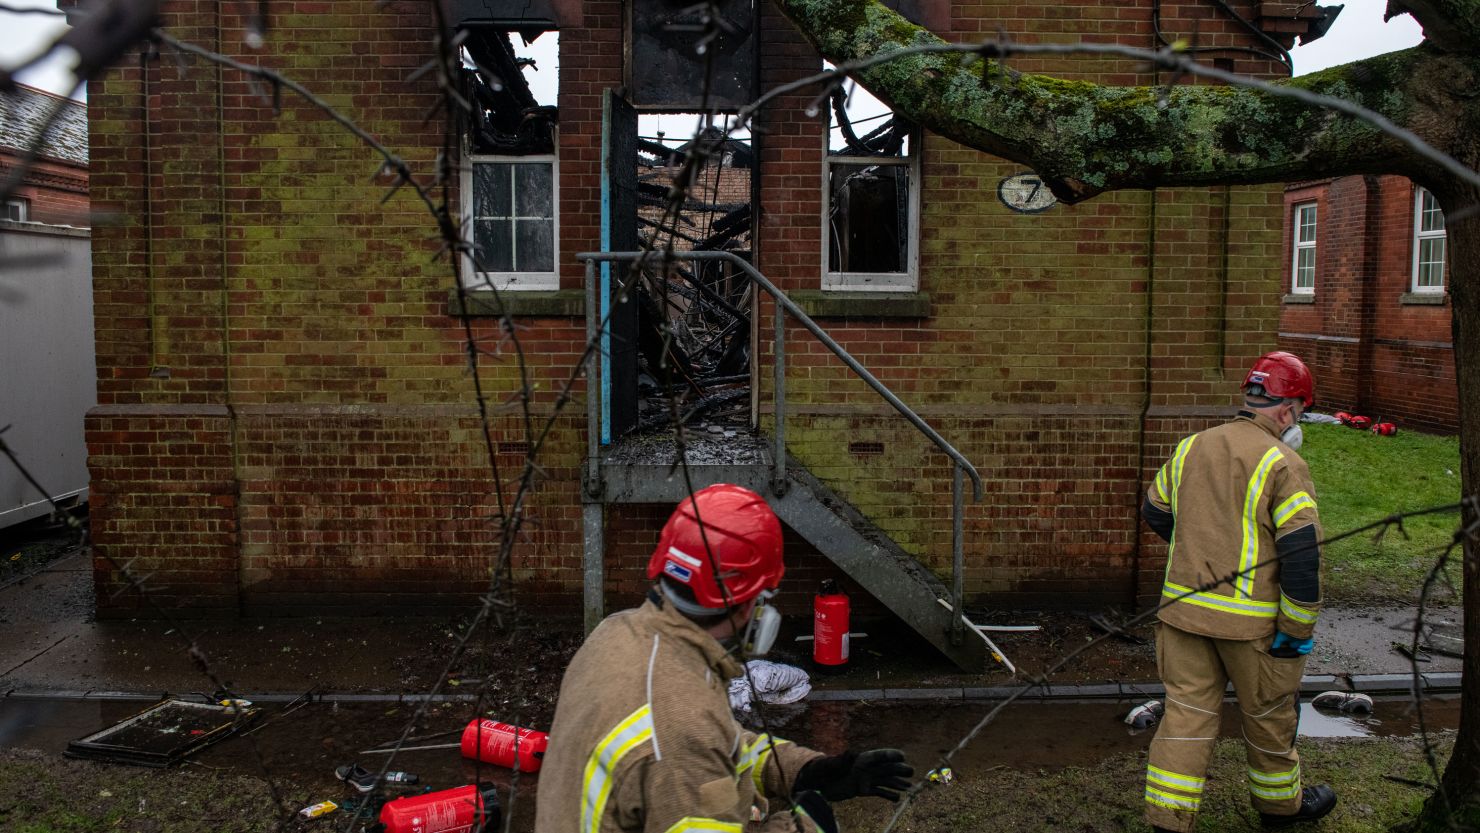 Firefighters inspect the charred remains of a block at Napier Barracks in Folkestone, England, on January 30, 2021 